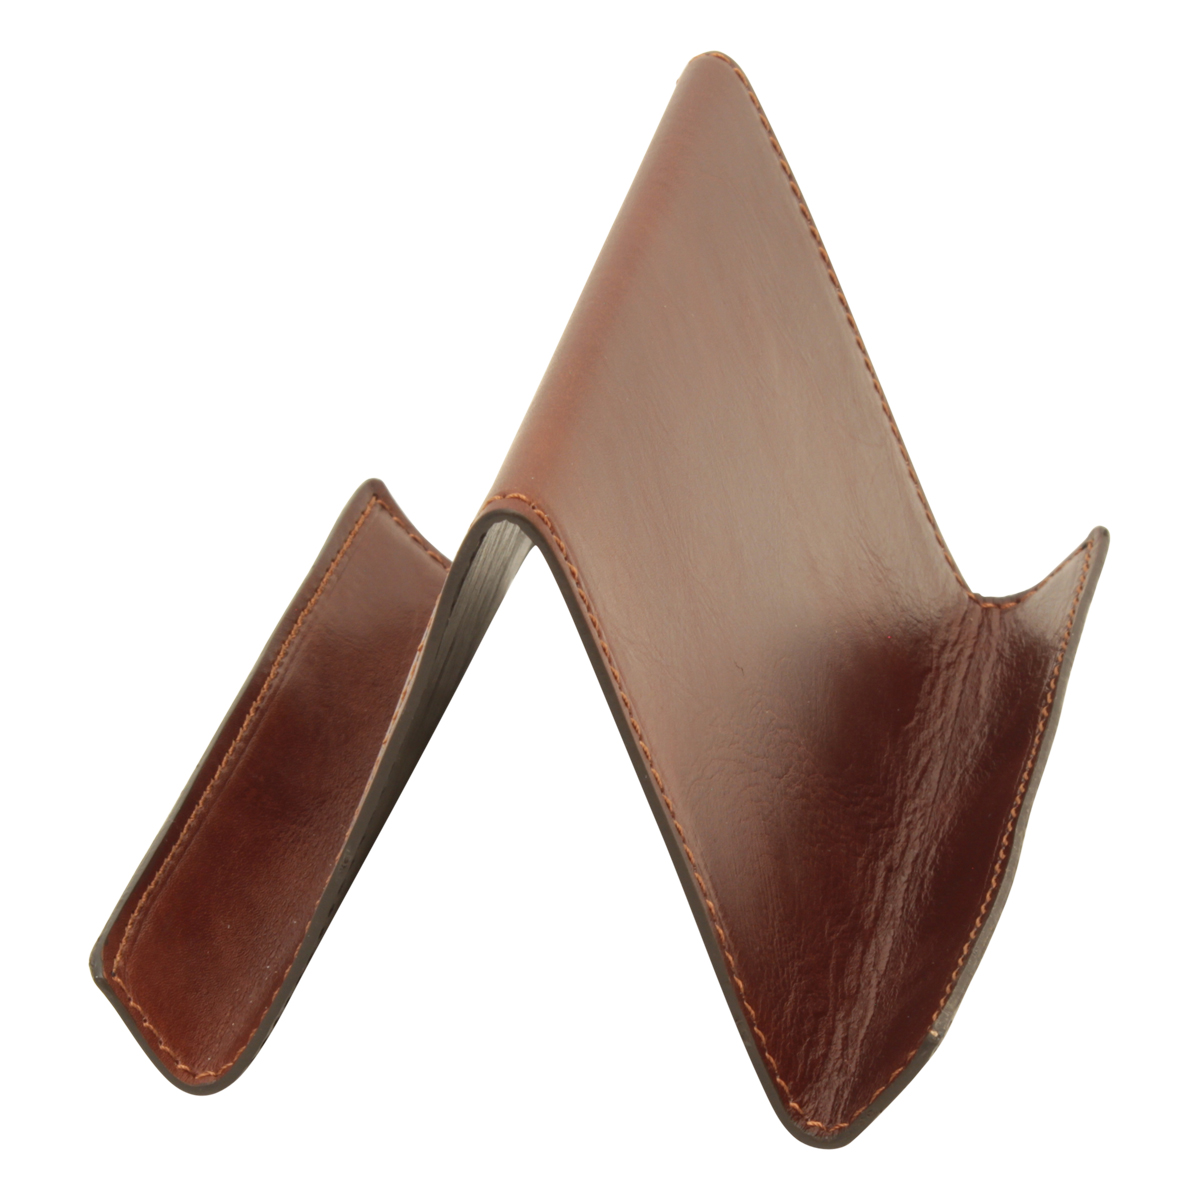 Leather Ipad and iphone stand  | 764089MA | EURO | Old Angler Firenze